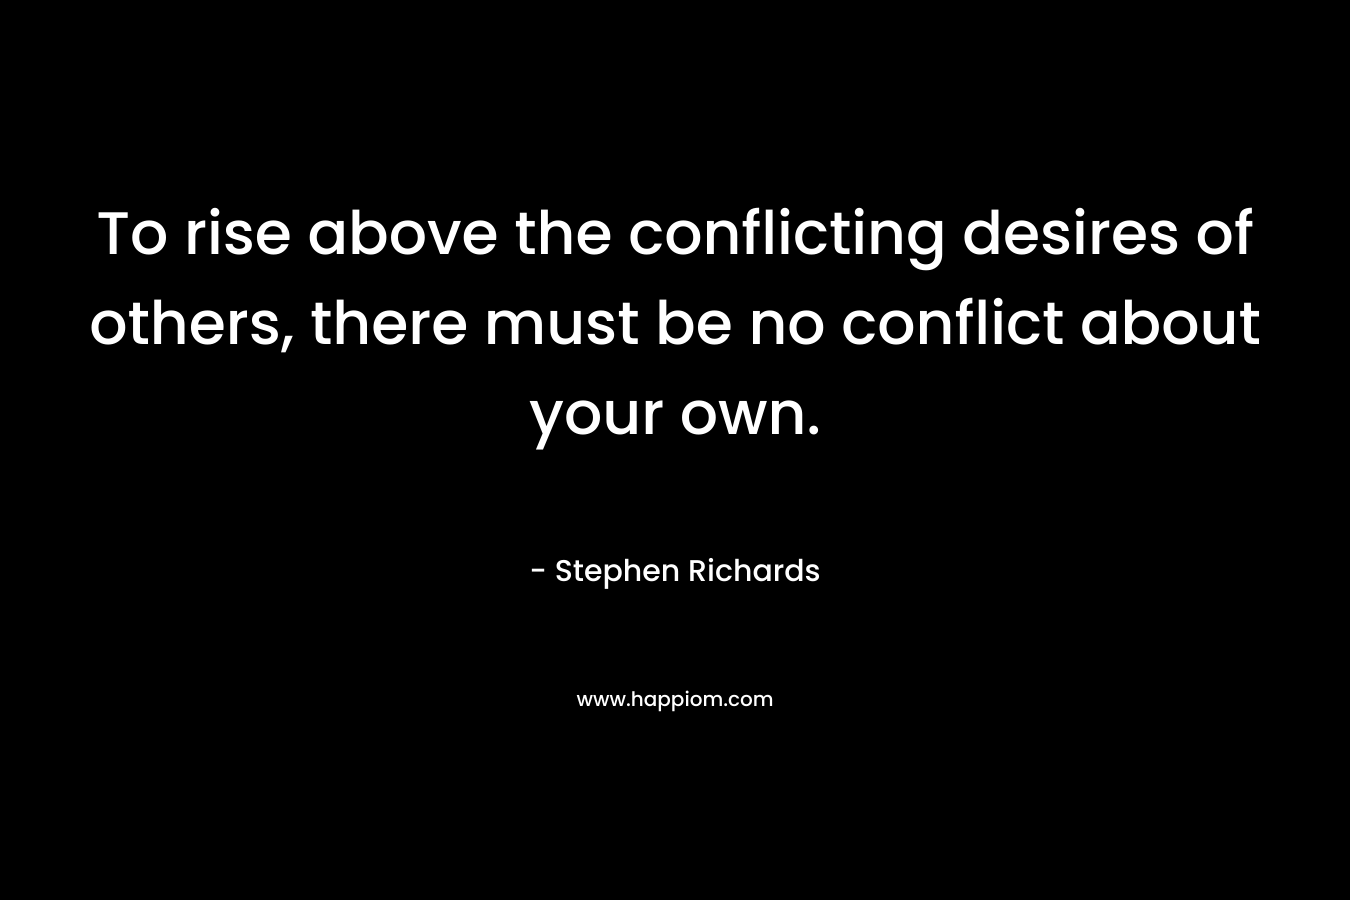 To rise above the conflicting desires of others, there must be no conflict about your own.